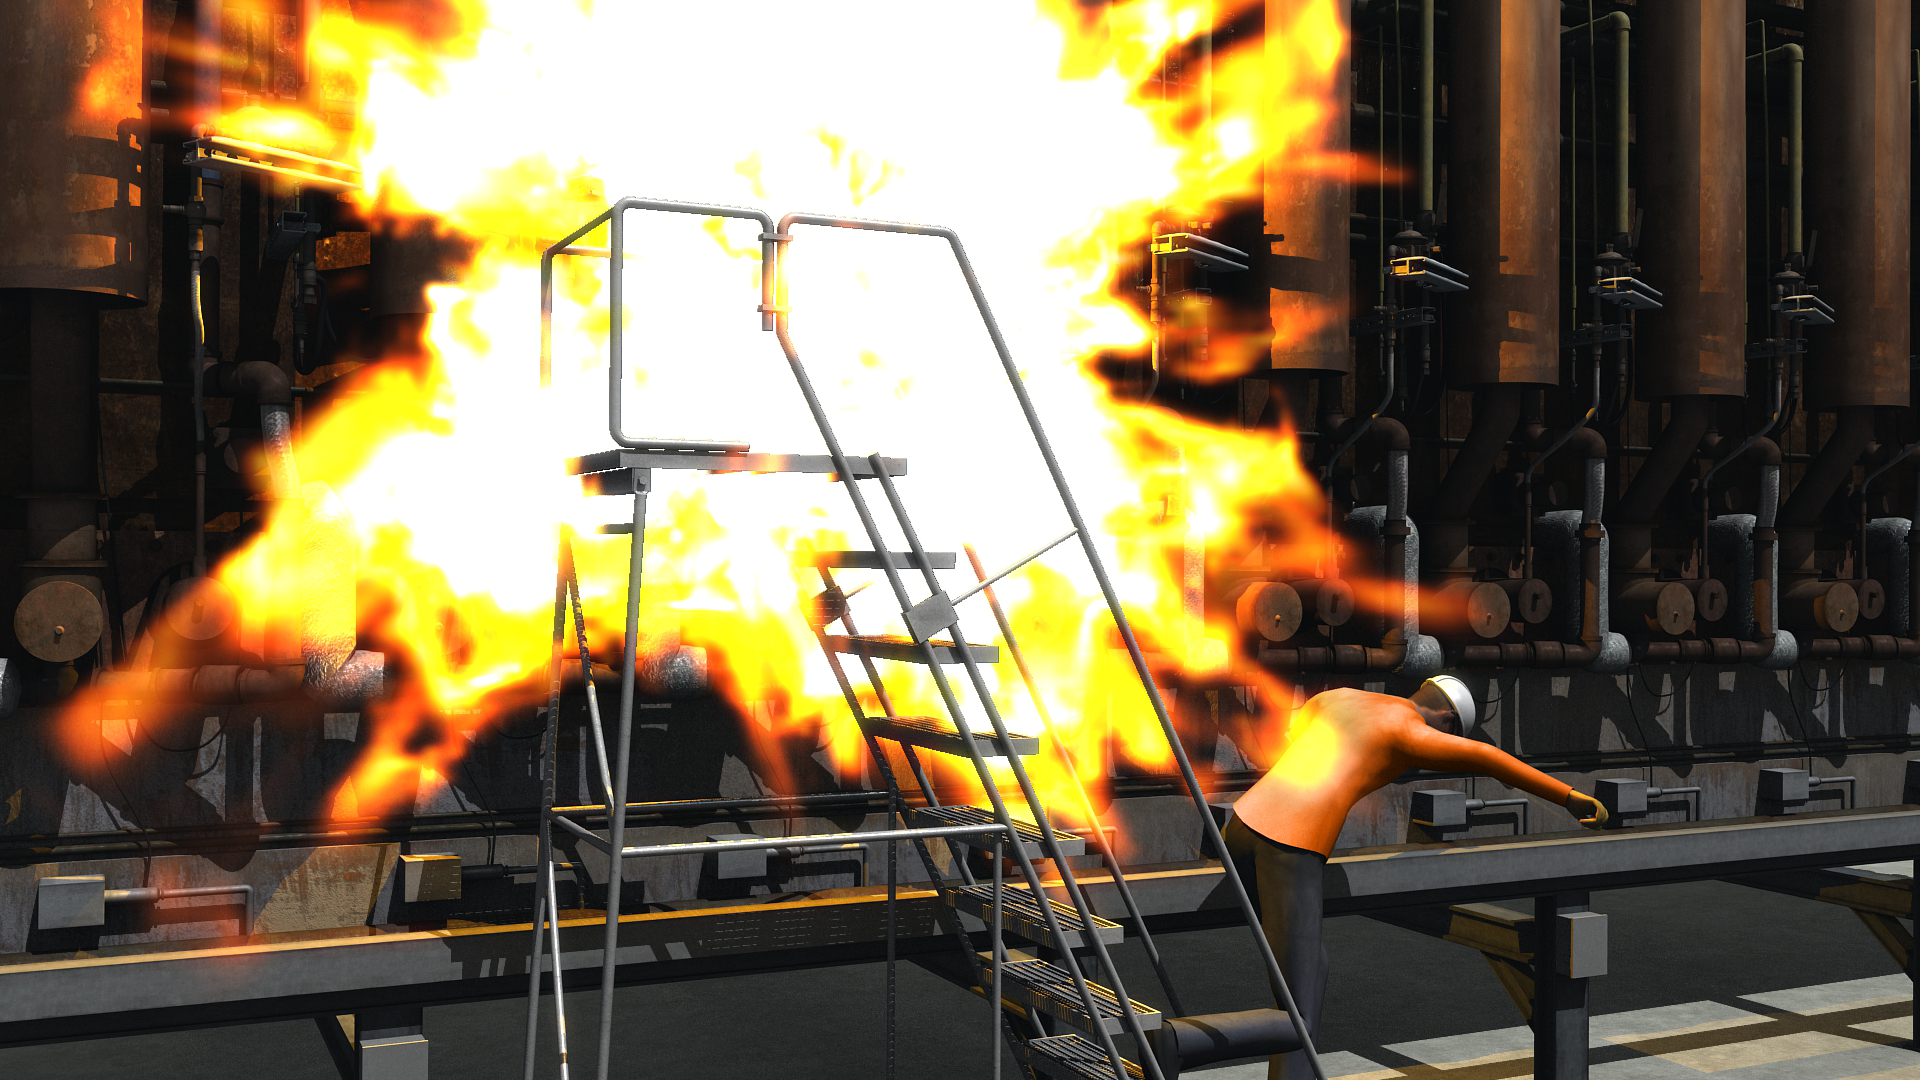 Animation Still from the CSB's safety video "Iron in the FIre"